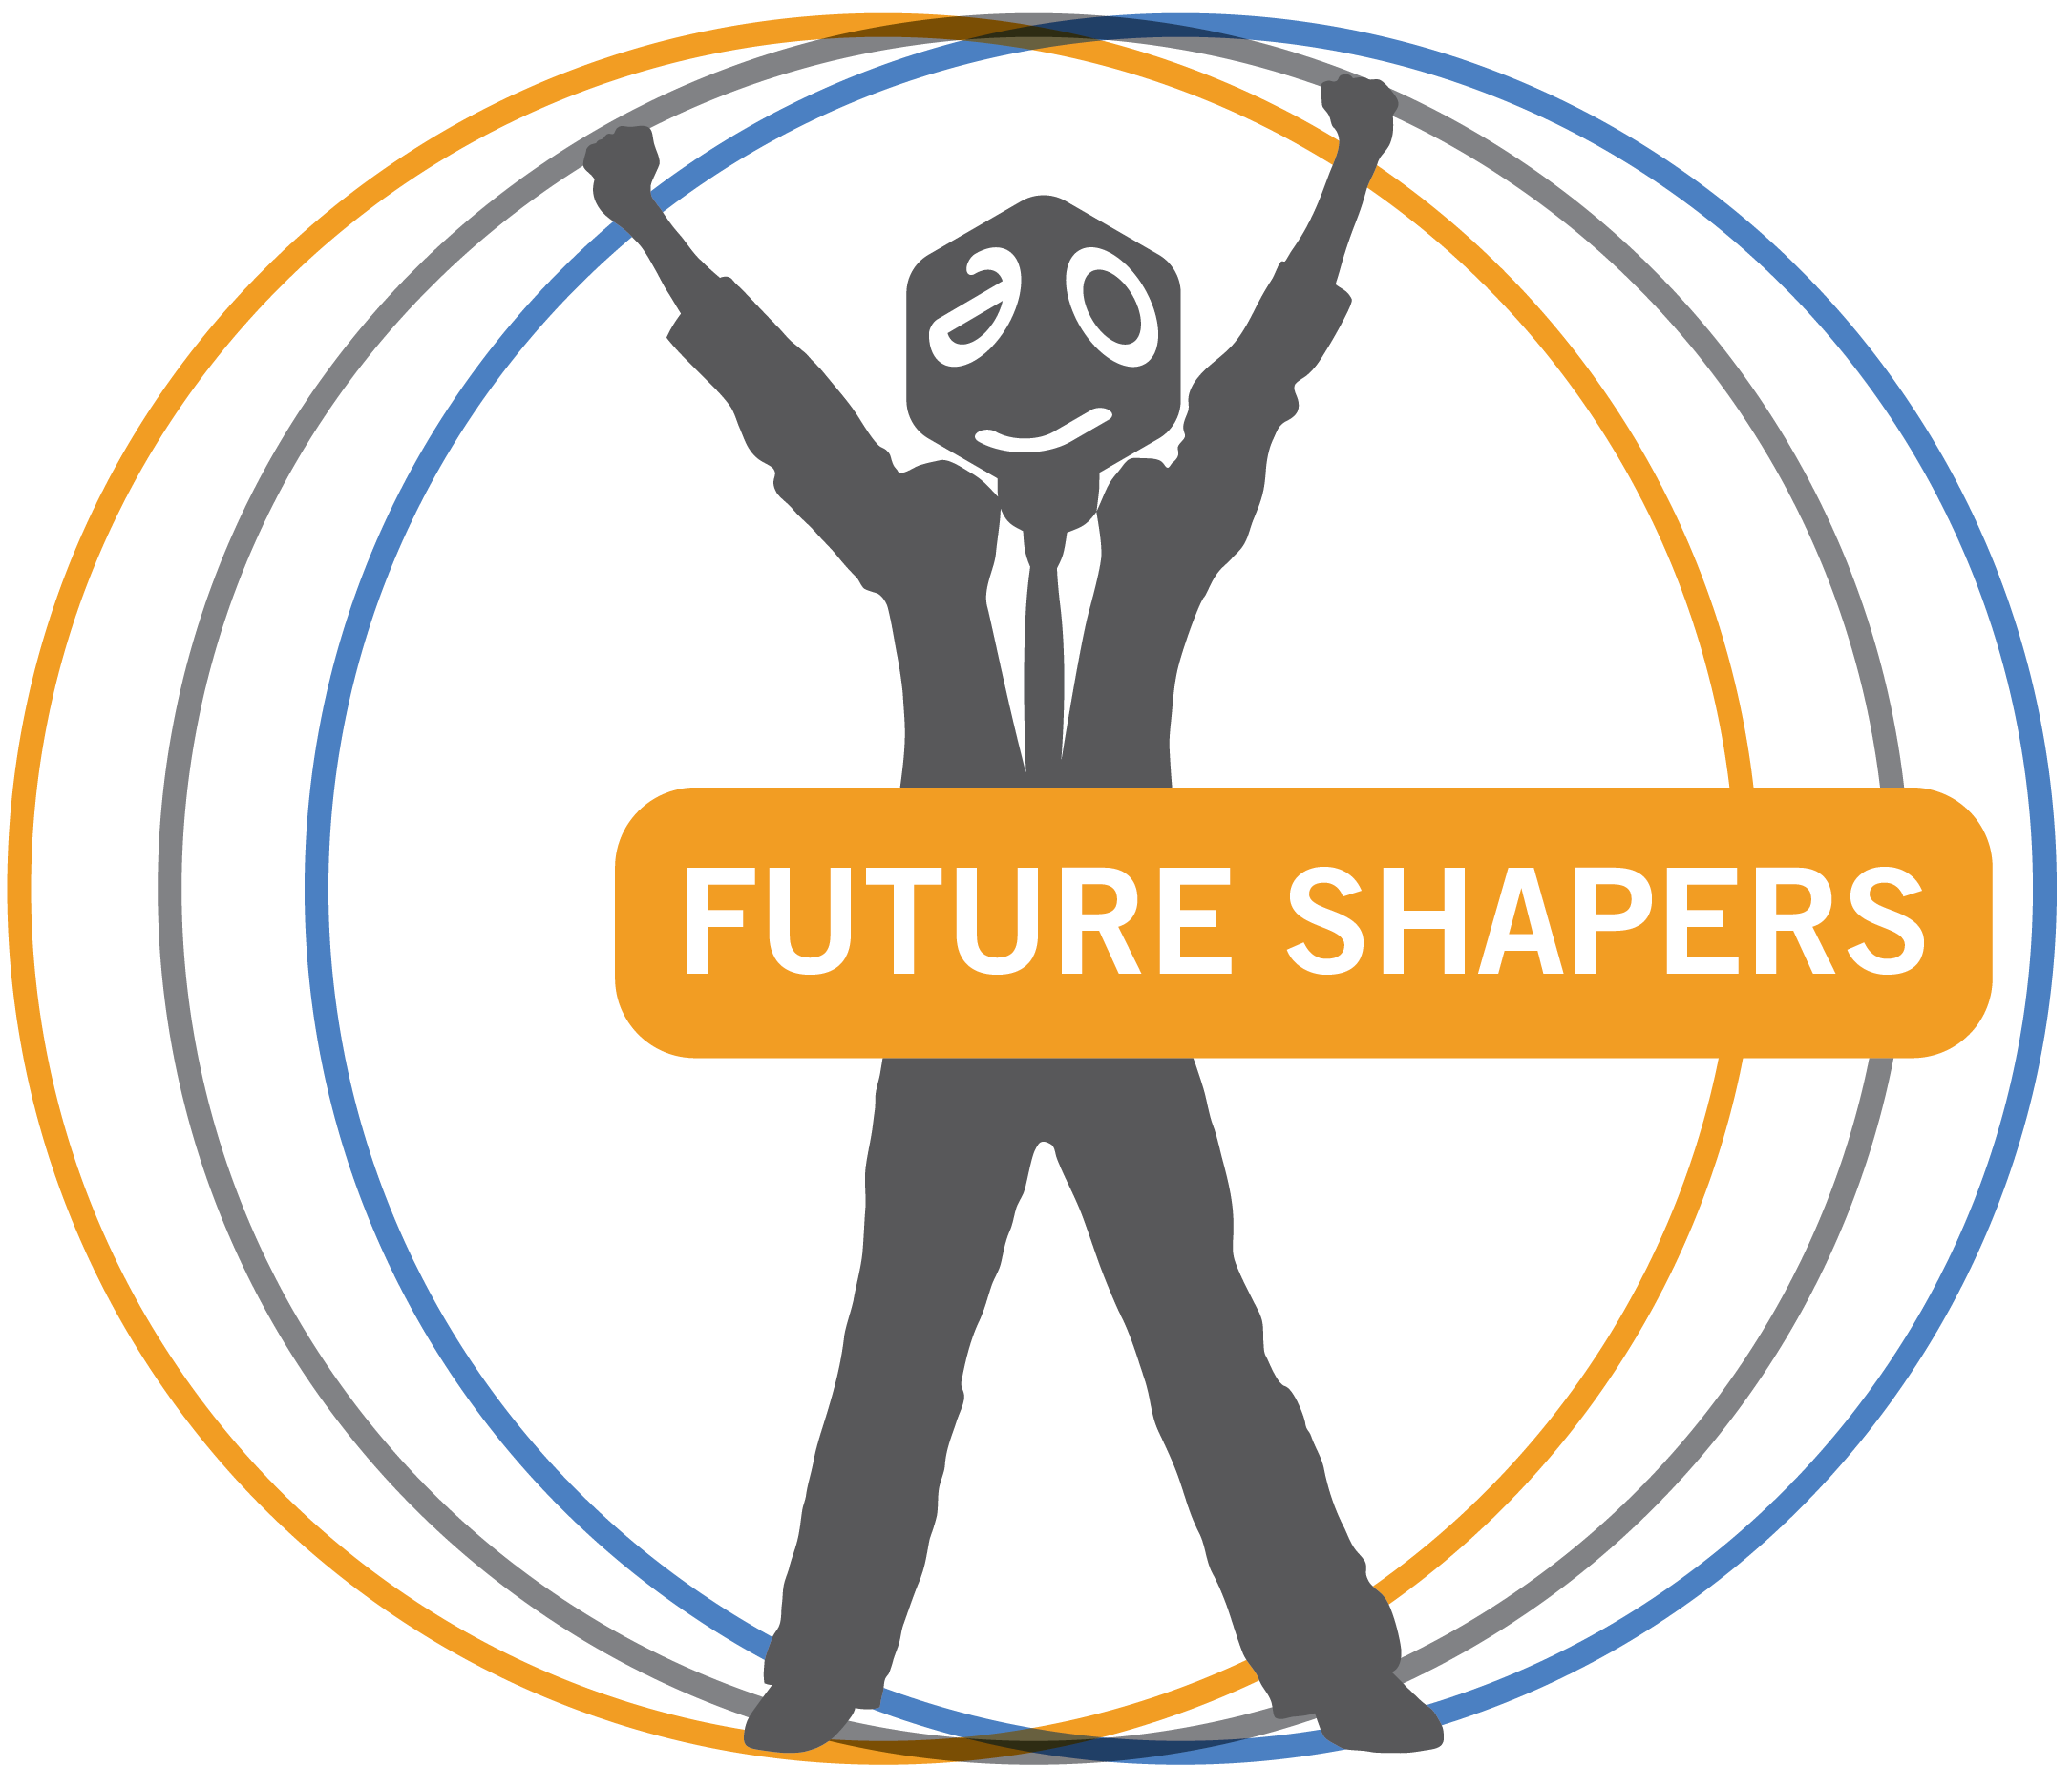 MDG_Future Shapers Infographic_08 2017-05